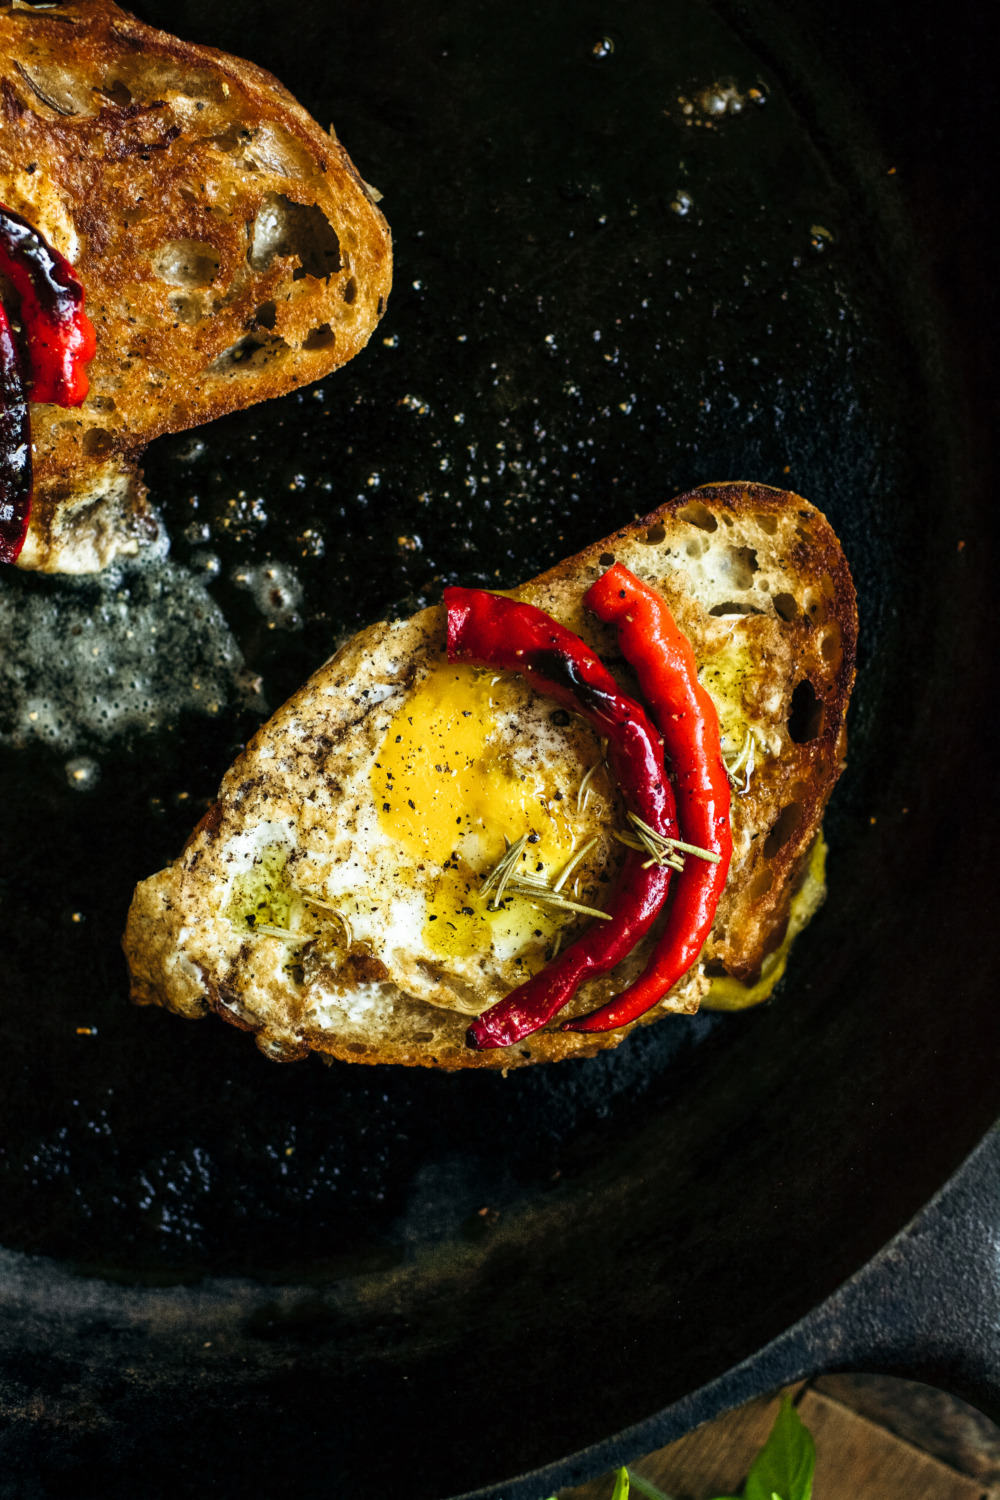 https://ciaochowbambina.com/wp-content/uploads/2020/08/22Moonstruck22-Eggs-with-Fried-Italian-Long-Hot-Peppers-2-of-5-2-of-1.jpg